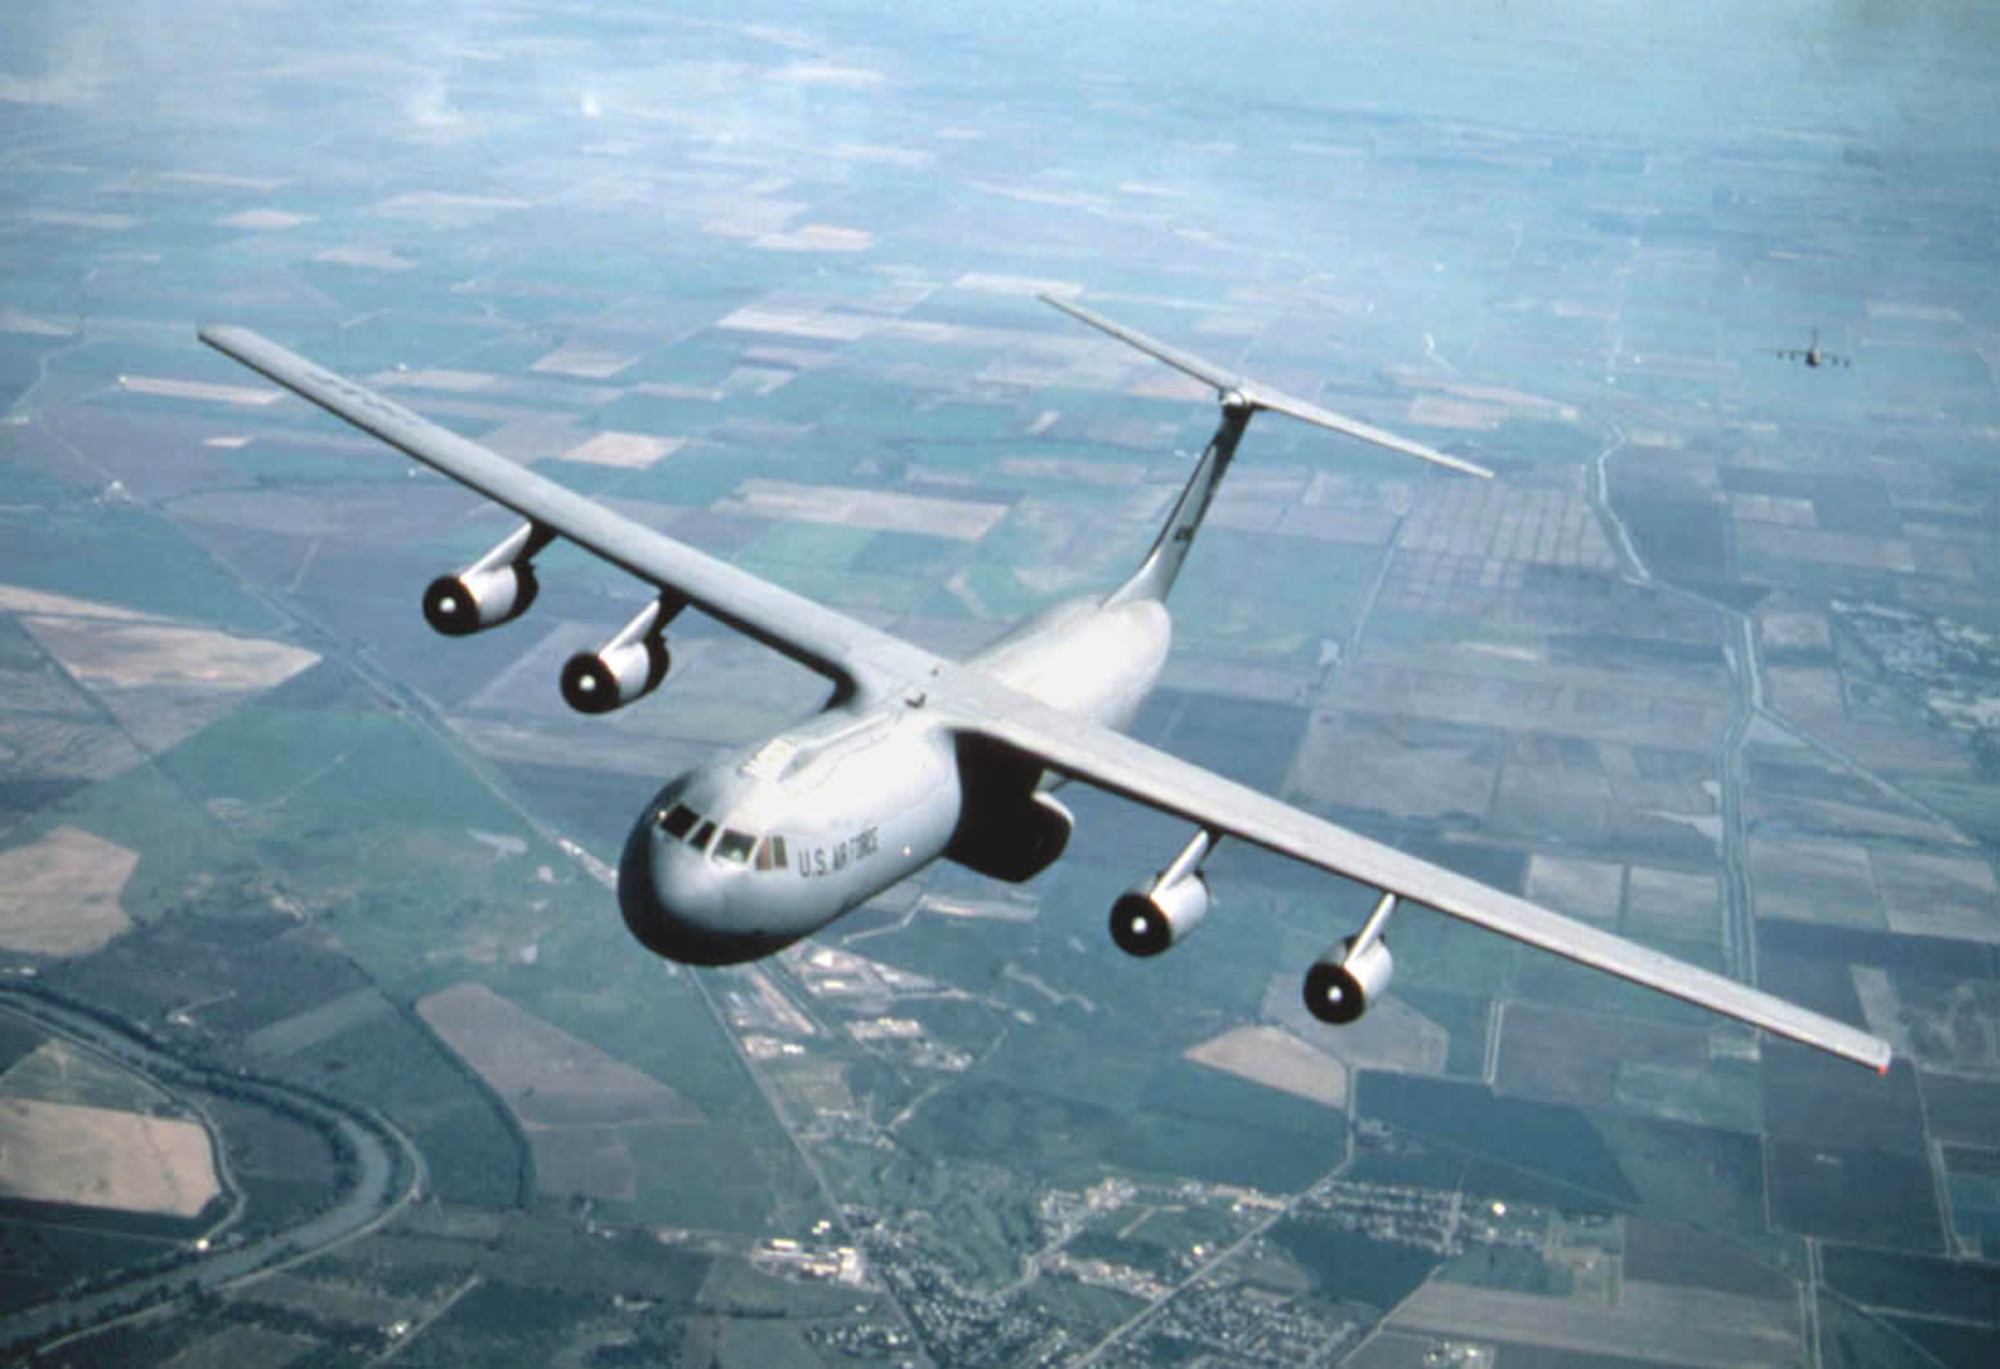 FILE PHOTO -- The C-141 Starlifter is the workhorse of the Air Mobility Command. The Starlifter fulfills the vast spectrum of airlift requirements through its ability to airlift combat forces over long distances, inject those forces and their equipment either by airland or airdrop, re-supply employed forces, and extract the sick and wounded from the hostile area to advanced medical facility. (U.S. Air Force photo)